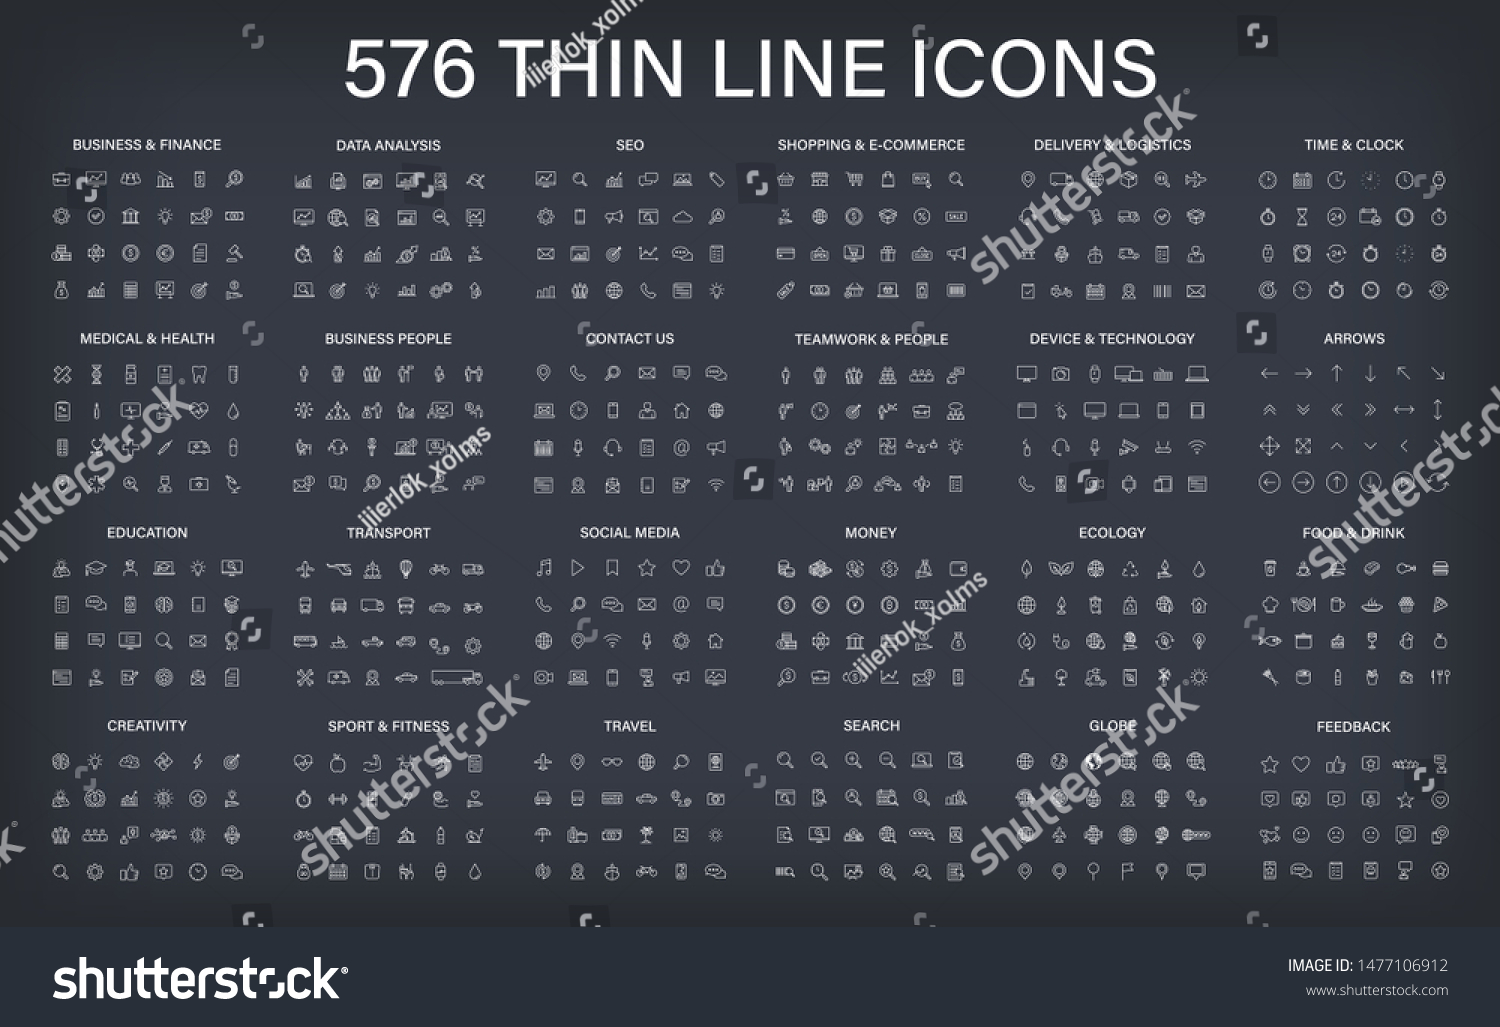 Big vector collection of 576 thin line Web icon. Business, finance, seo, shopping, logistics, medical, health, people, teamwork, contact us, arrows, technology, social media, education, creativity. #1477106912